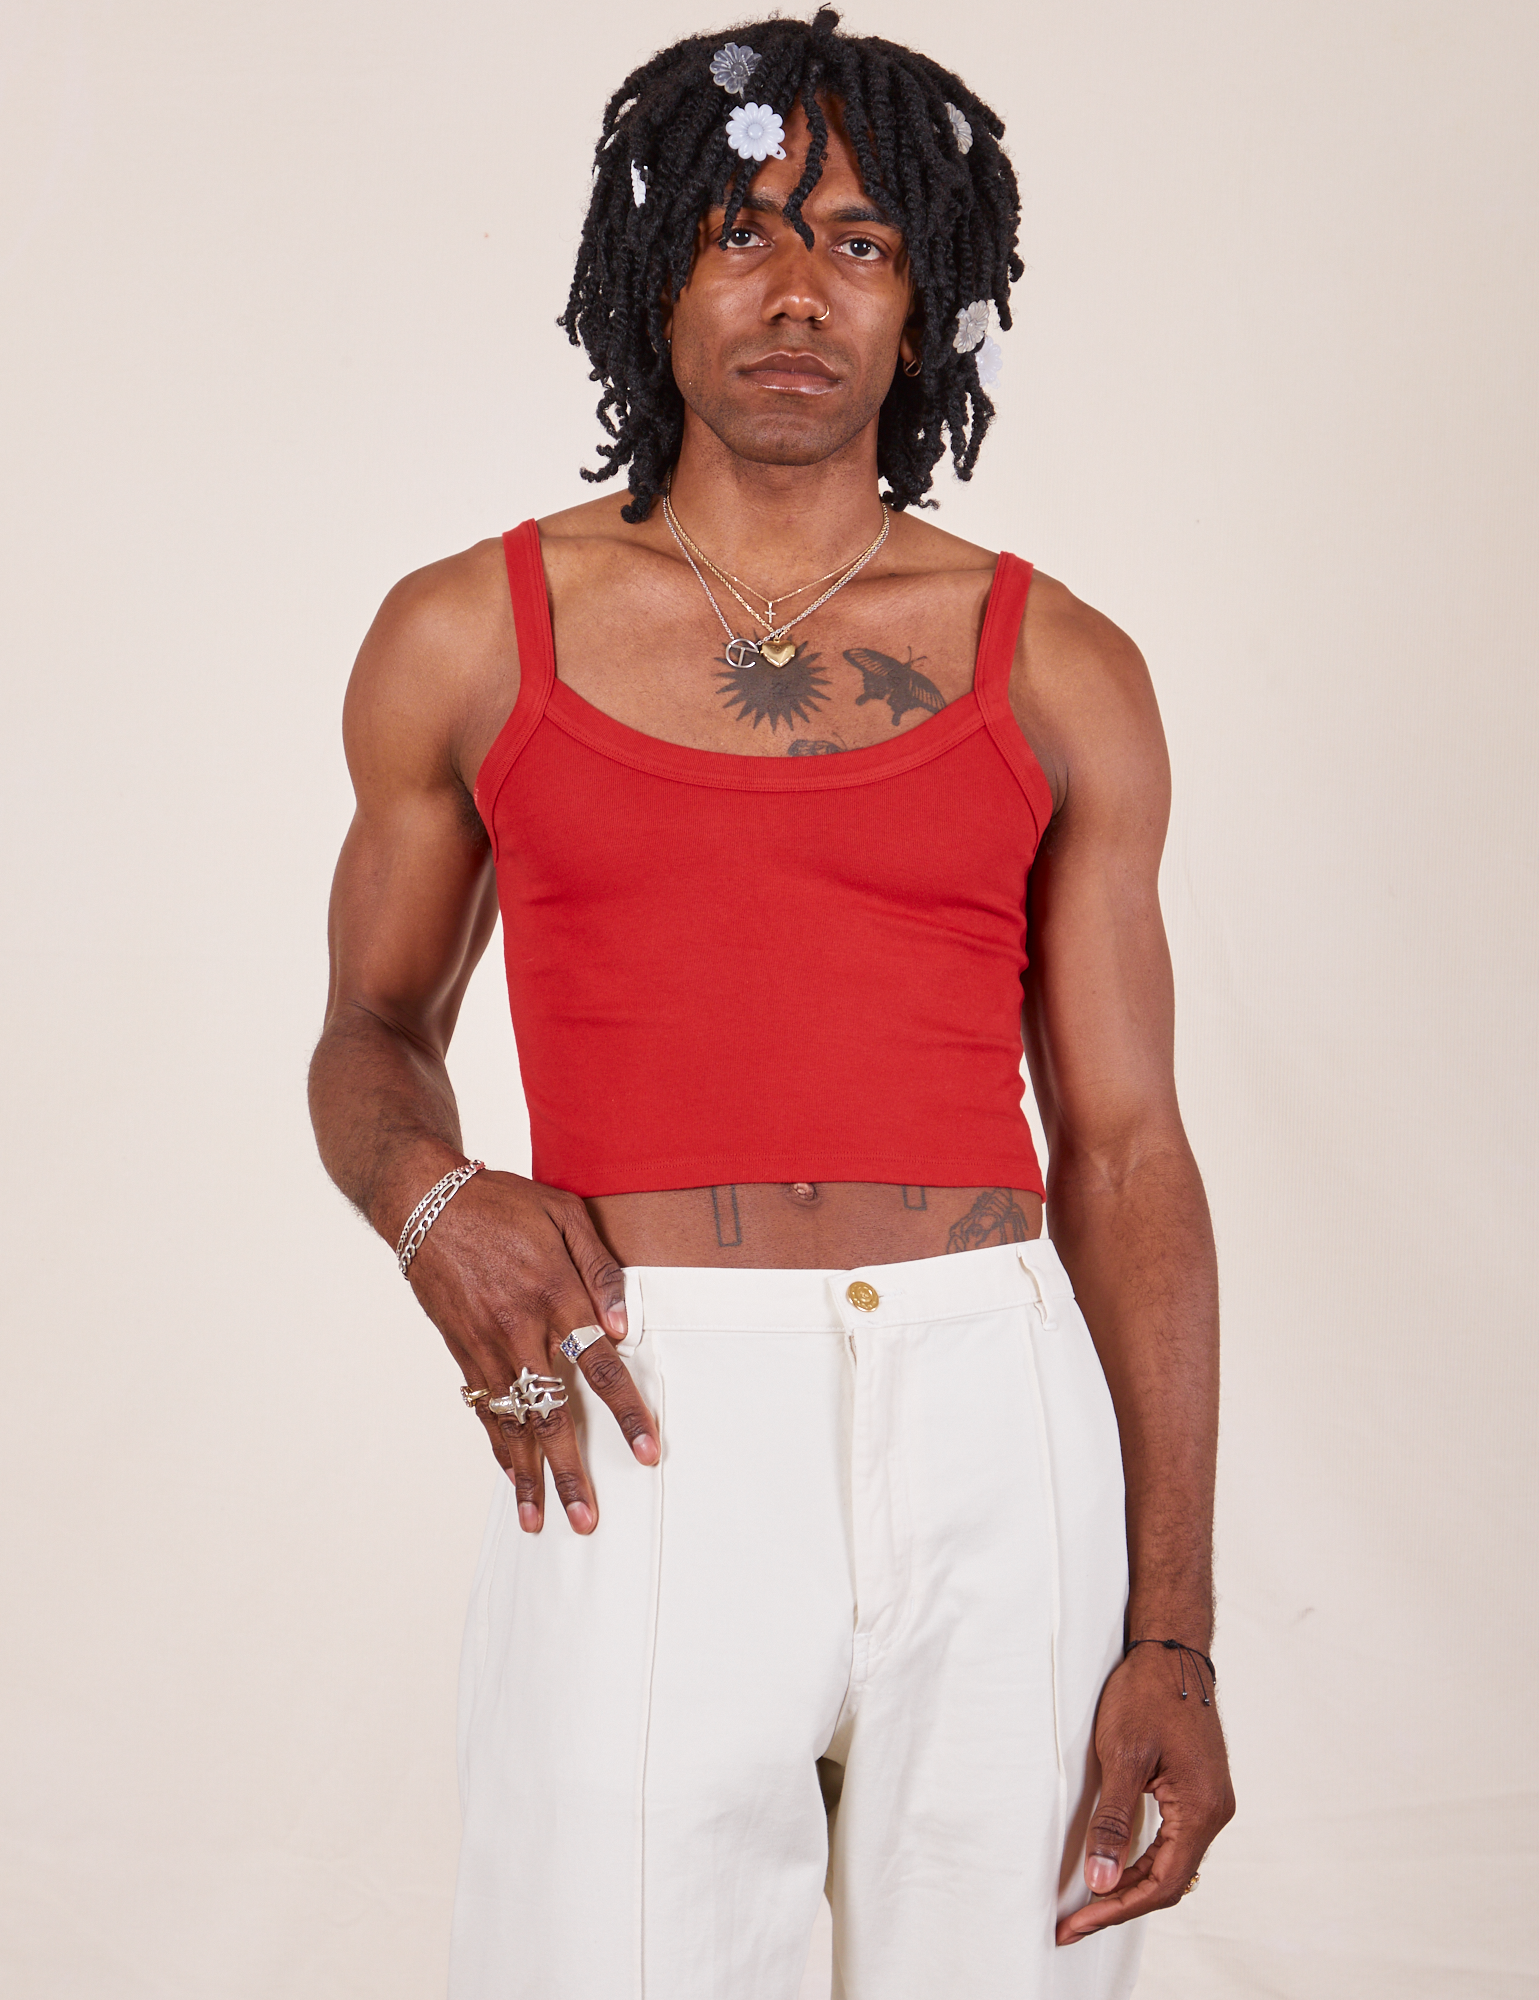 Jerrod is 6&#39;3&quot; and wearing S Cropped Cami in Mustang Red paired with vintage off-white Western Pants